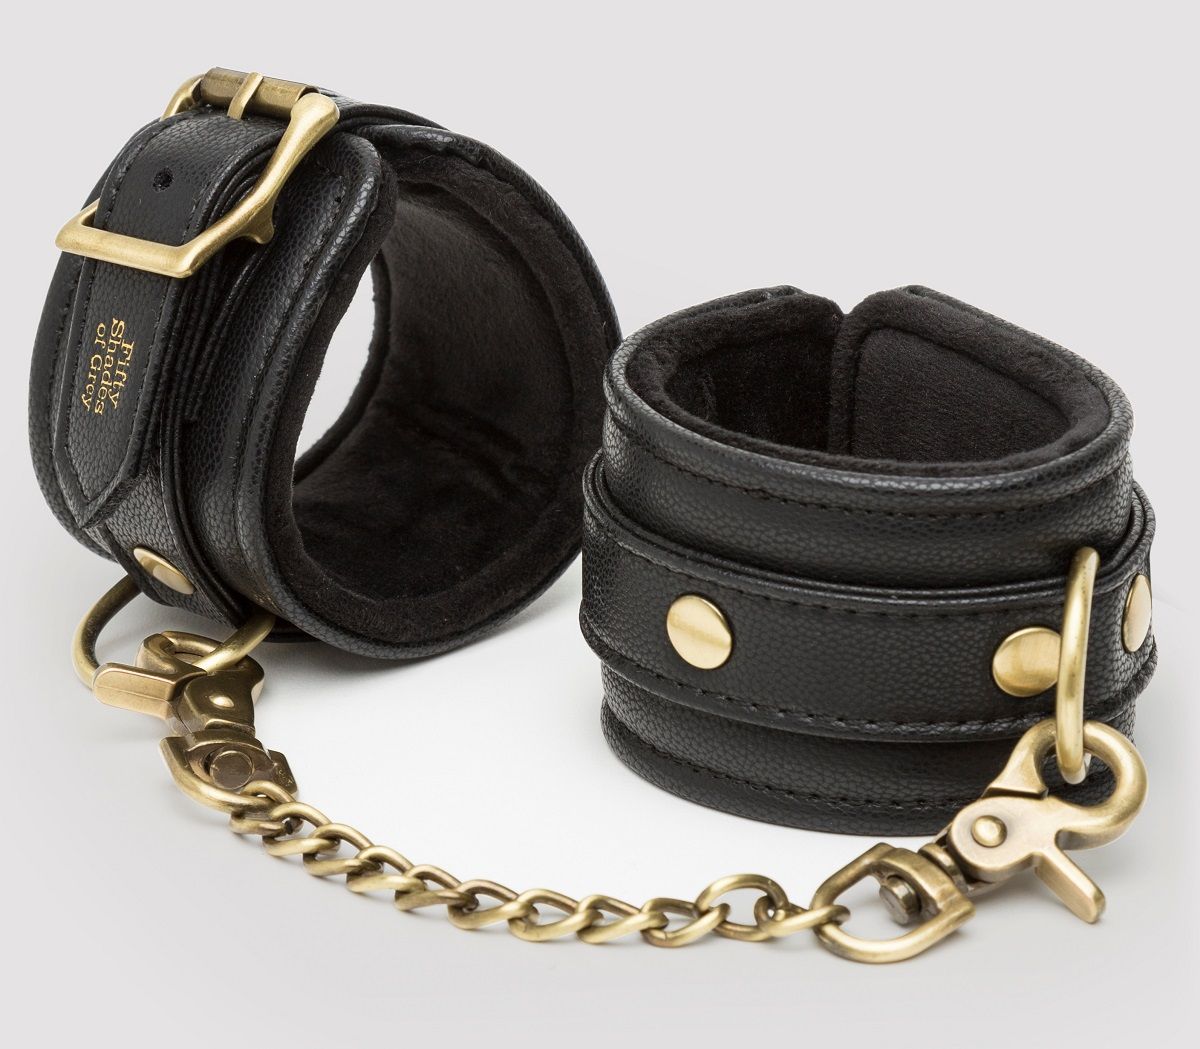   Bound to You Faux Leather Wrist Cuffs